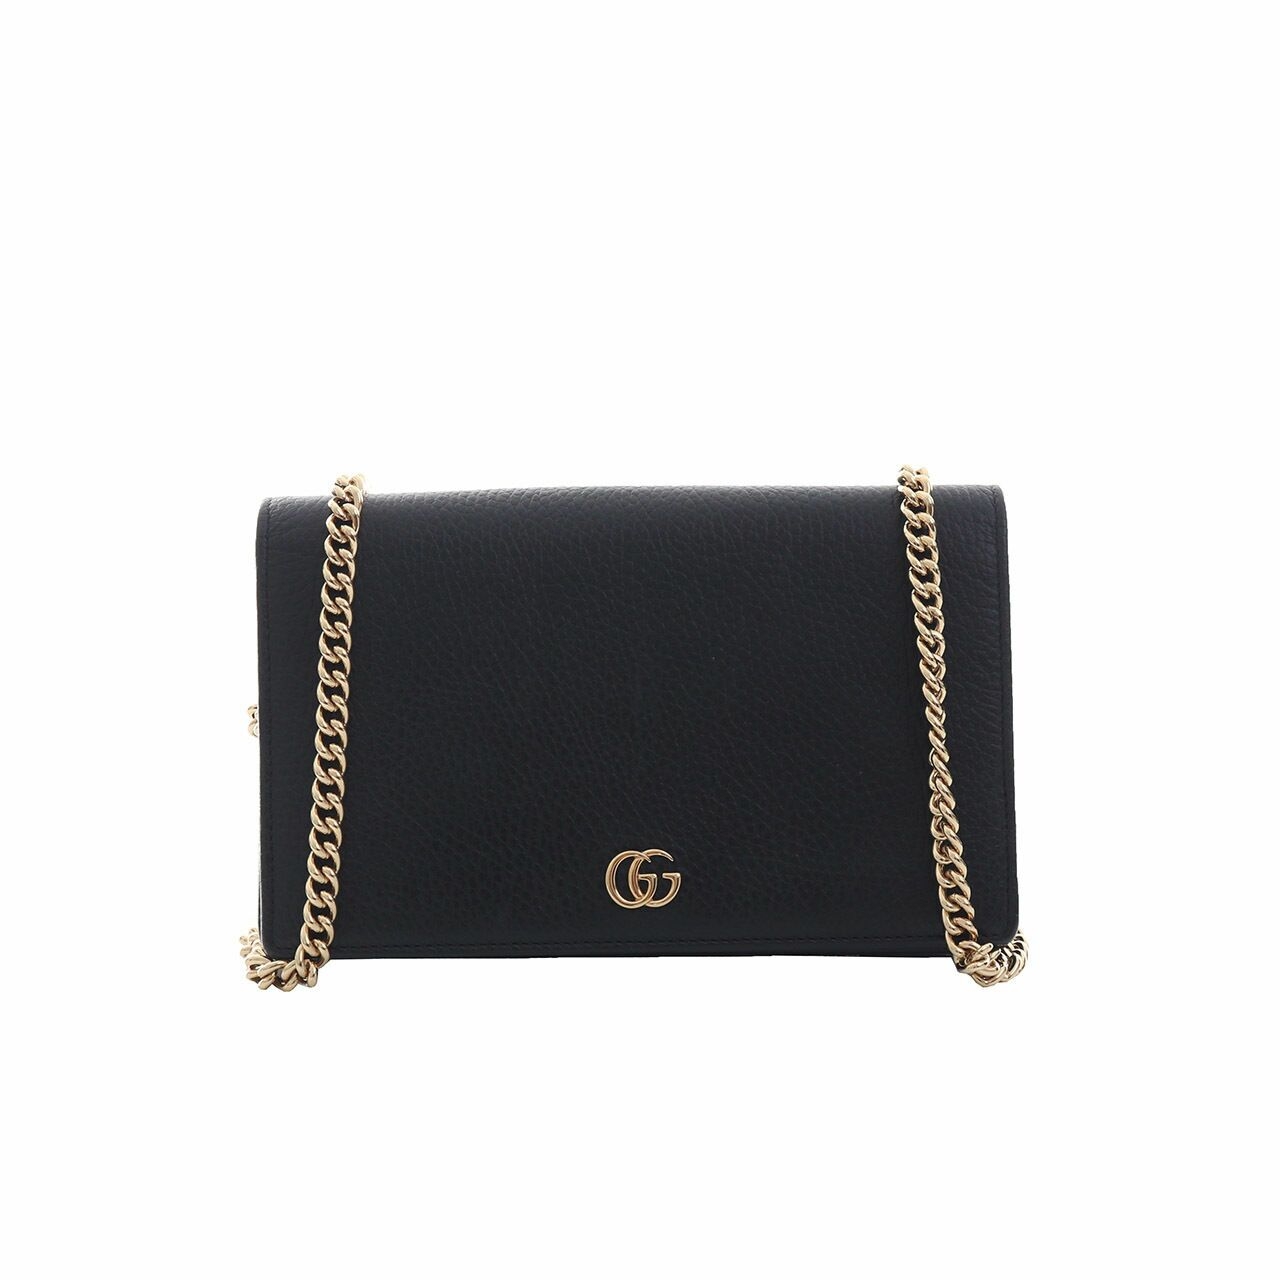 Gucci GG Marmont Leather Mini Chain Sling Bag